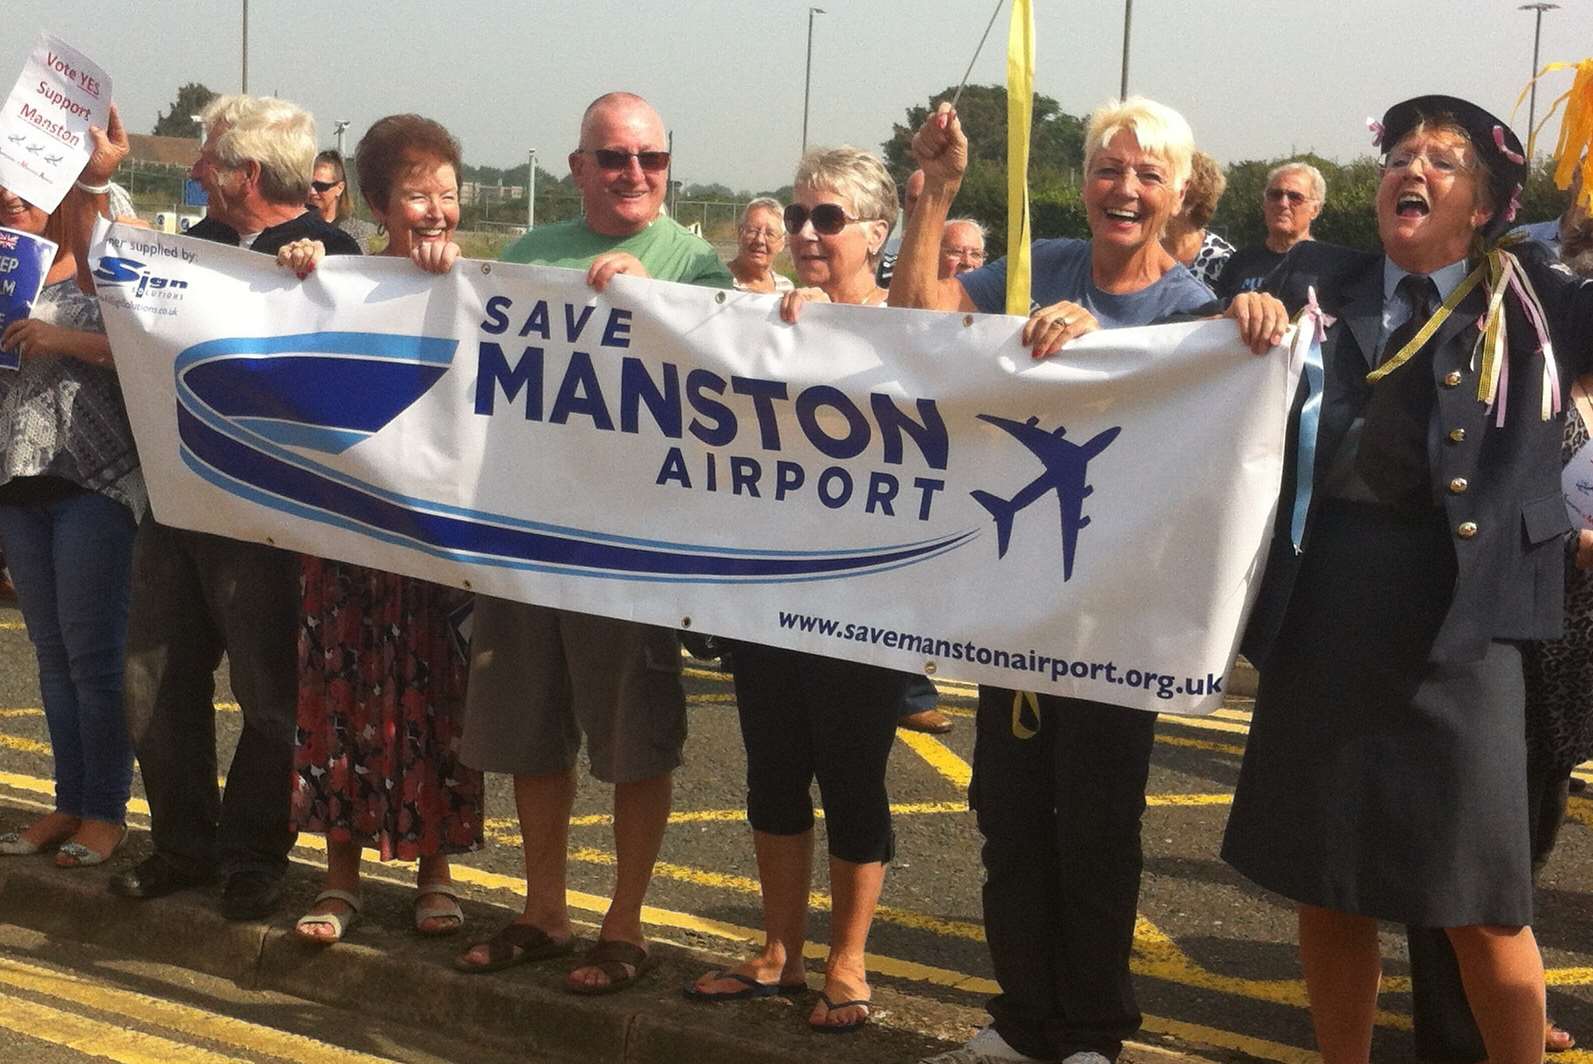 Save Manston Airport supporters during a previous rally